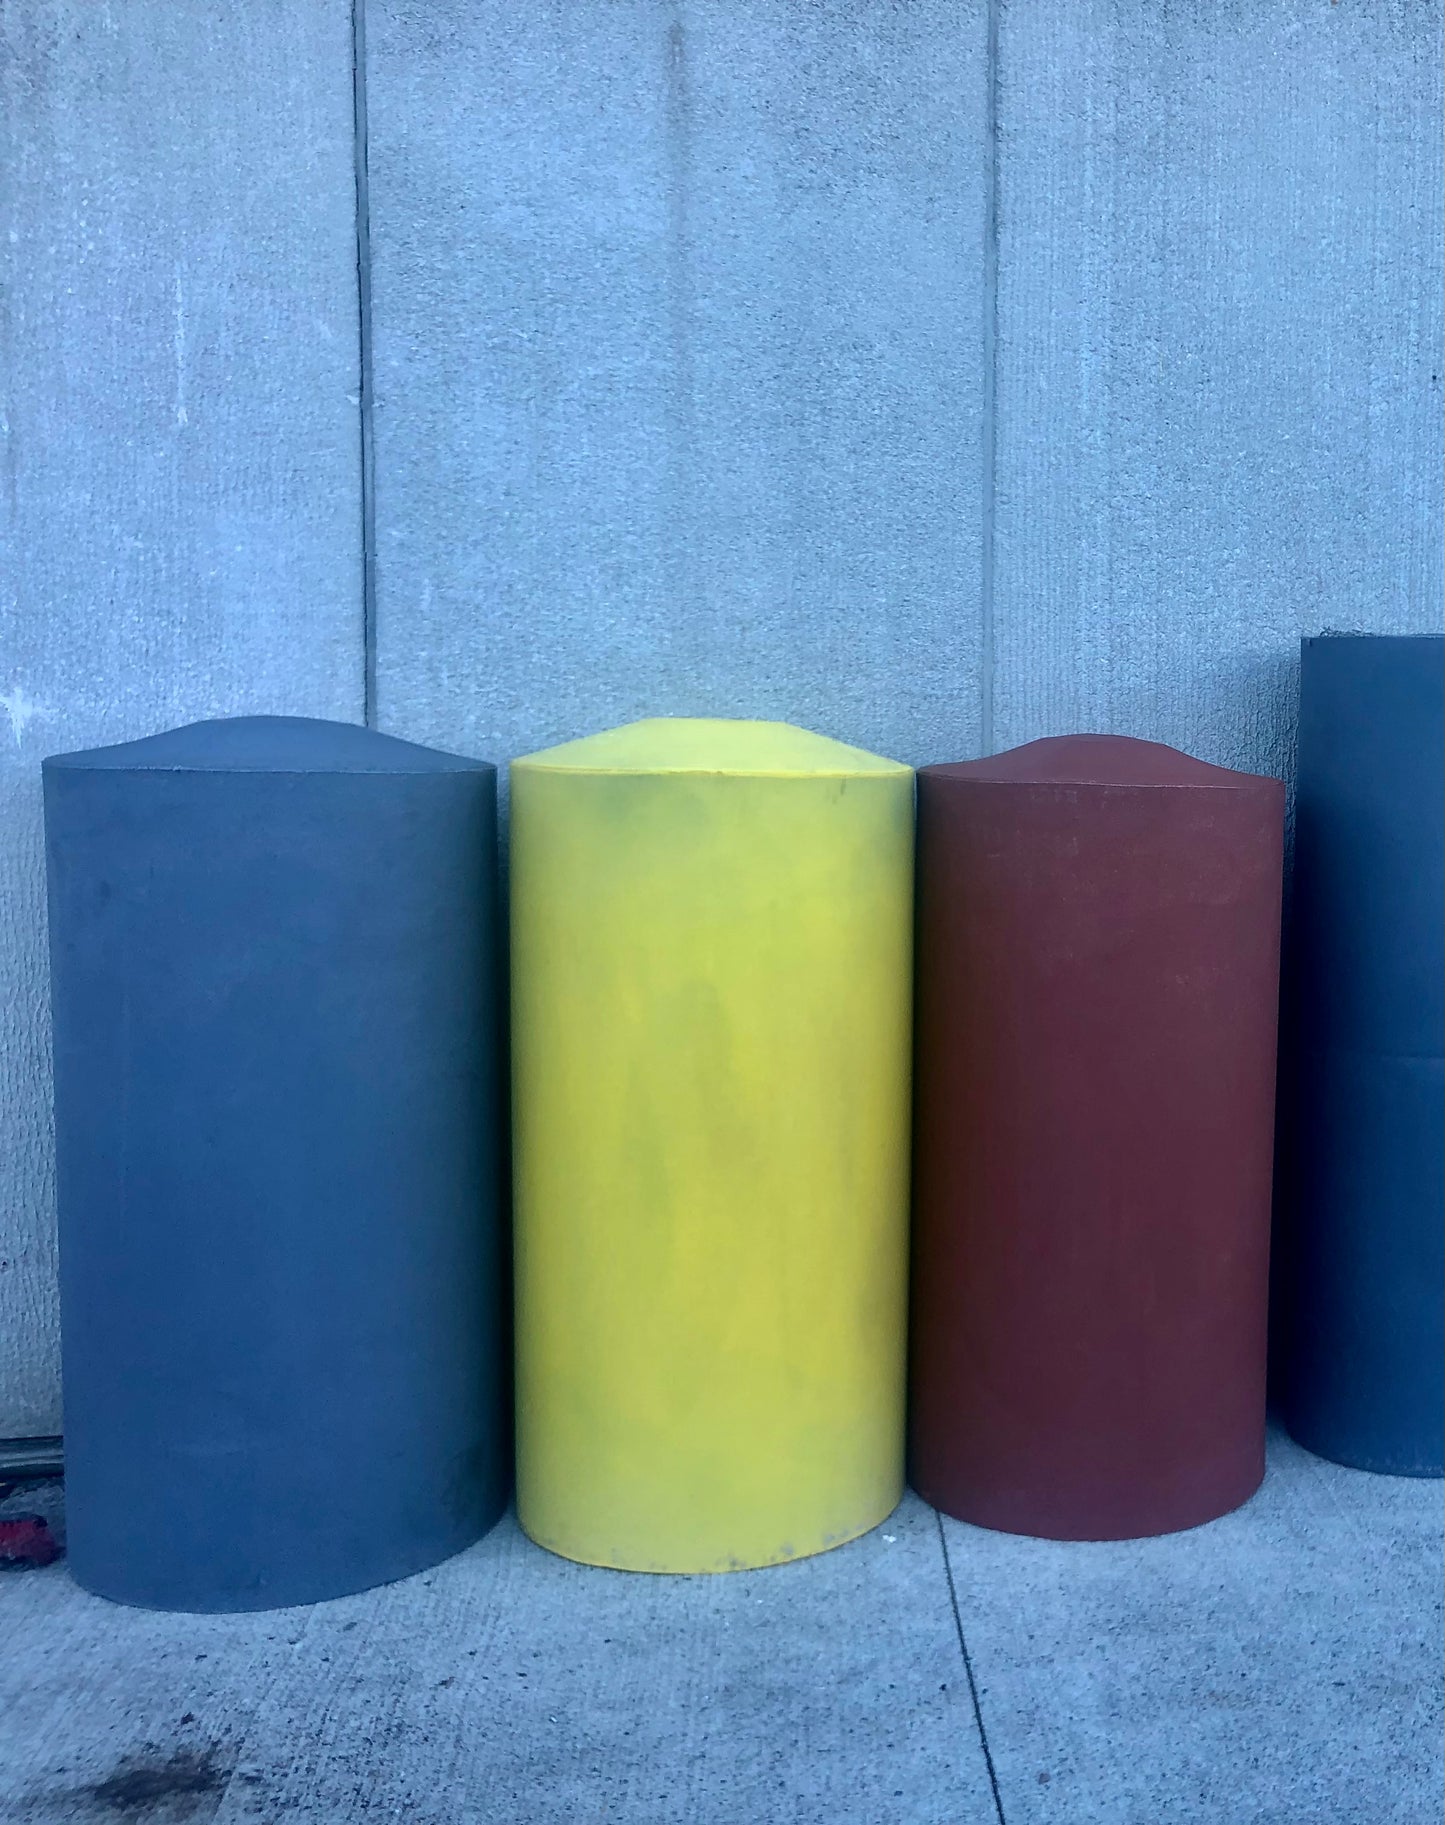 160 gal water tanks in grey, yellow and Brick red